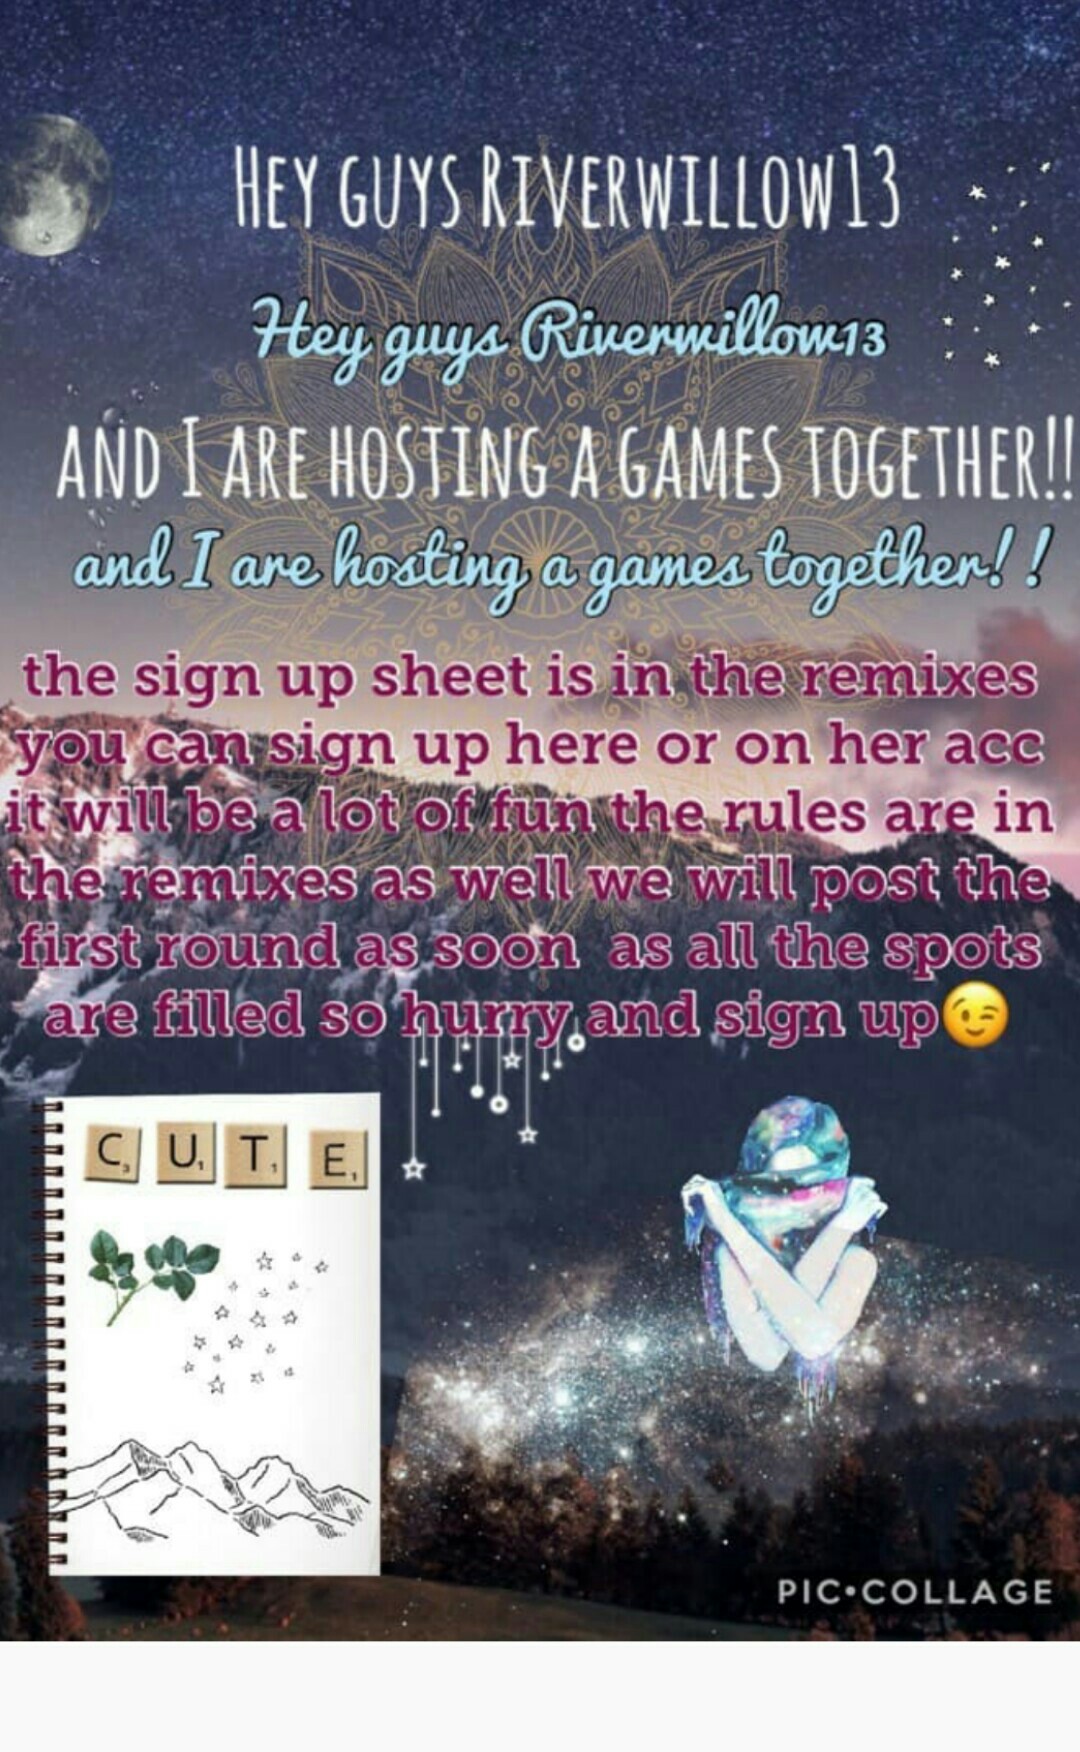 Plz enter our game it will mean so much yo me and Riverwillow13